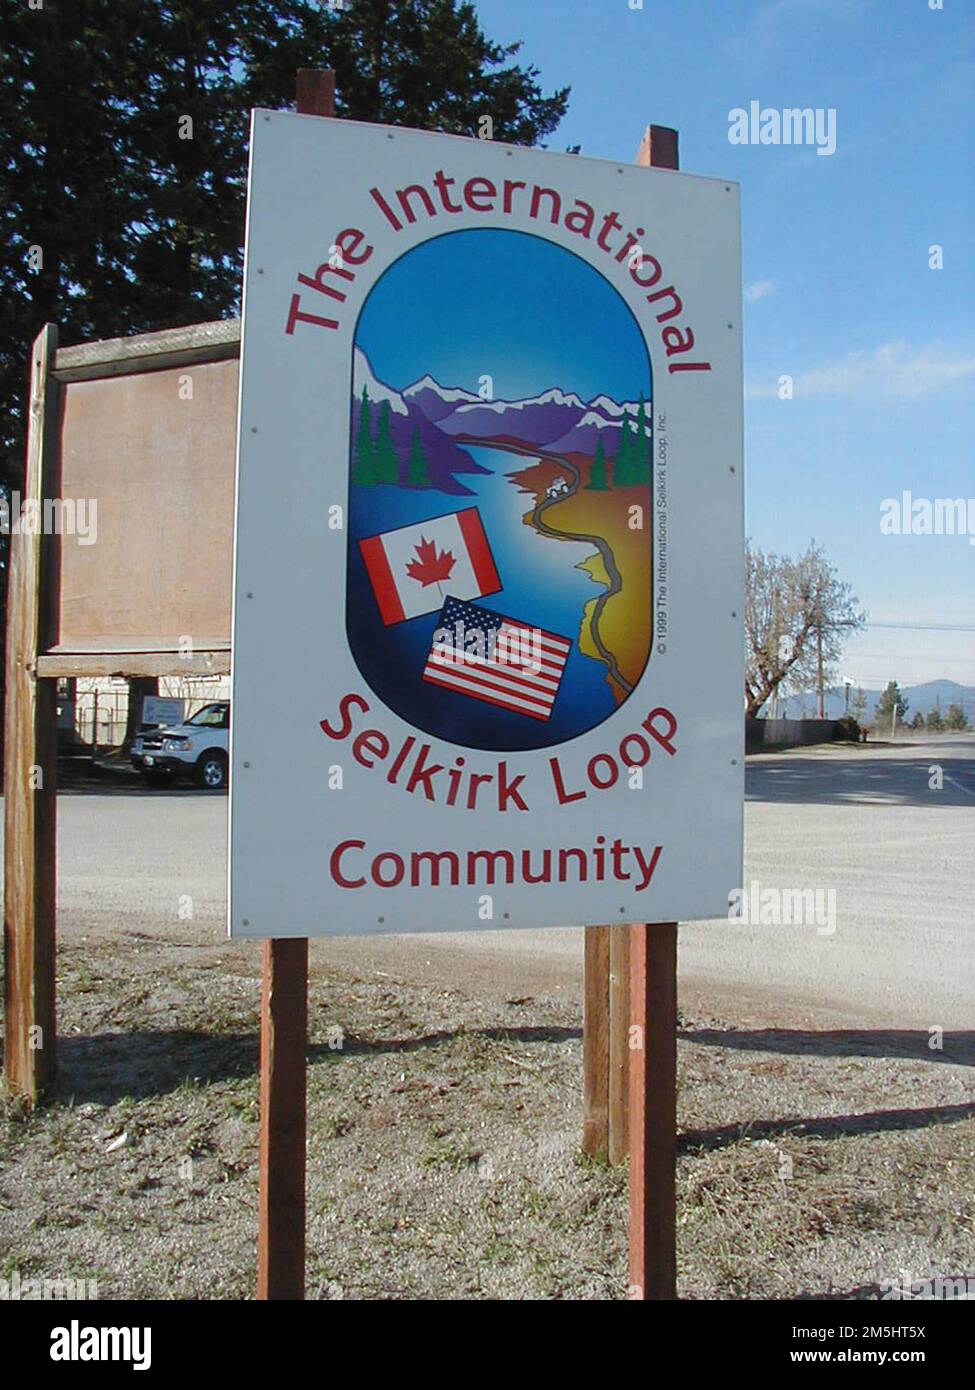 International Selkirk Loop - ISL Community Wayfinding Sign. International Selkirk Loop community signs like this one are used for wayfinding at the entrances to Loop communities. Loop logo signs also are used at major highway junctions and key locations for traveler guidance. (48.863° N 117.369° W) Stock Photo